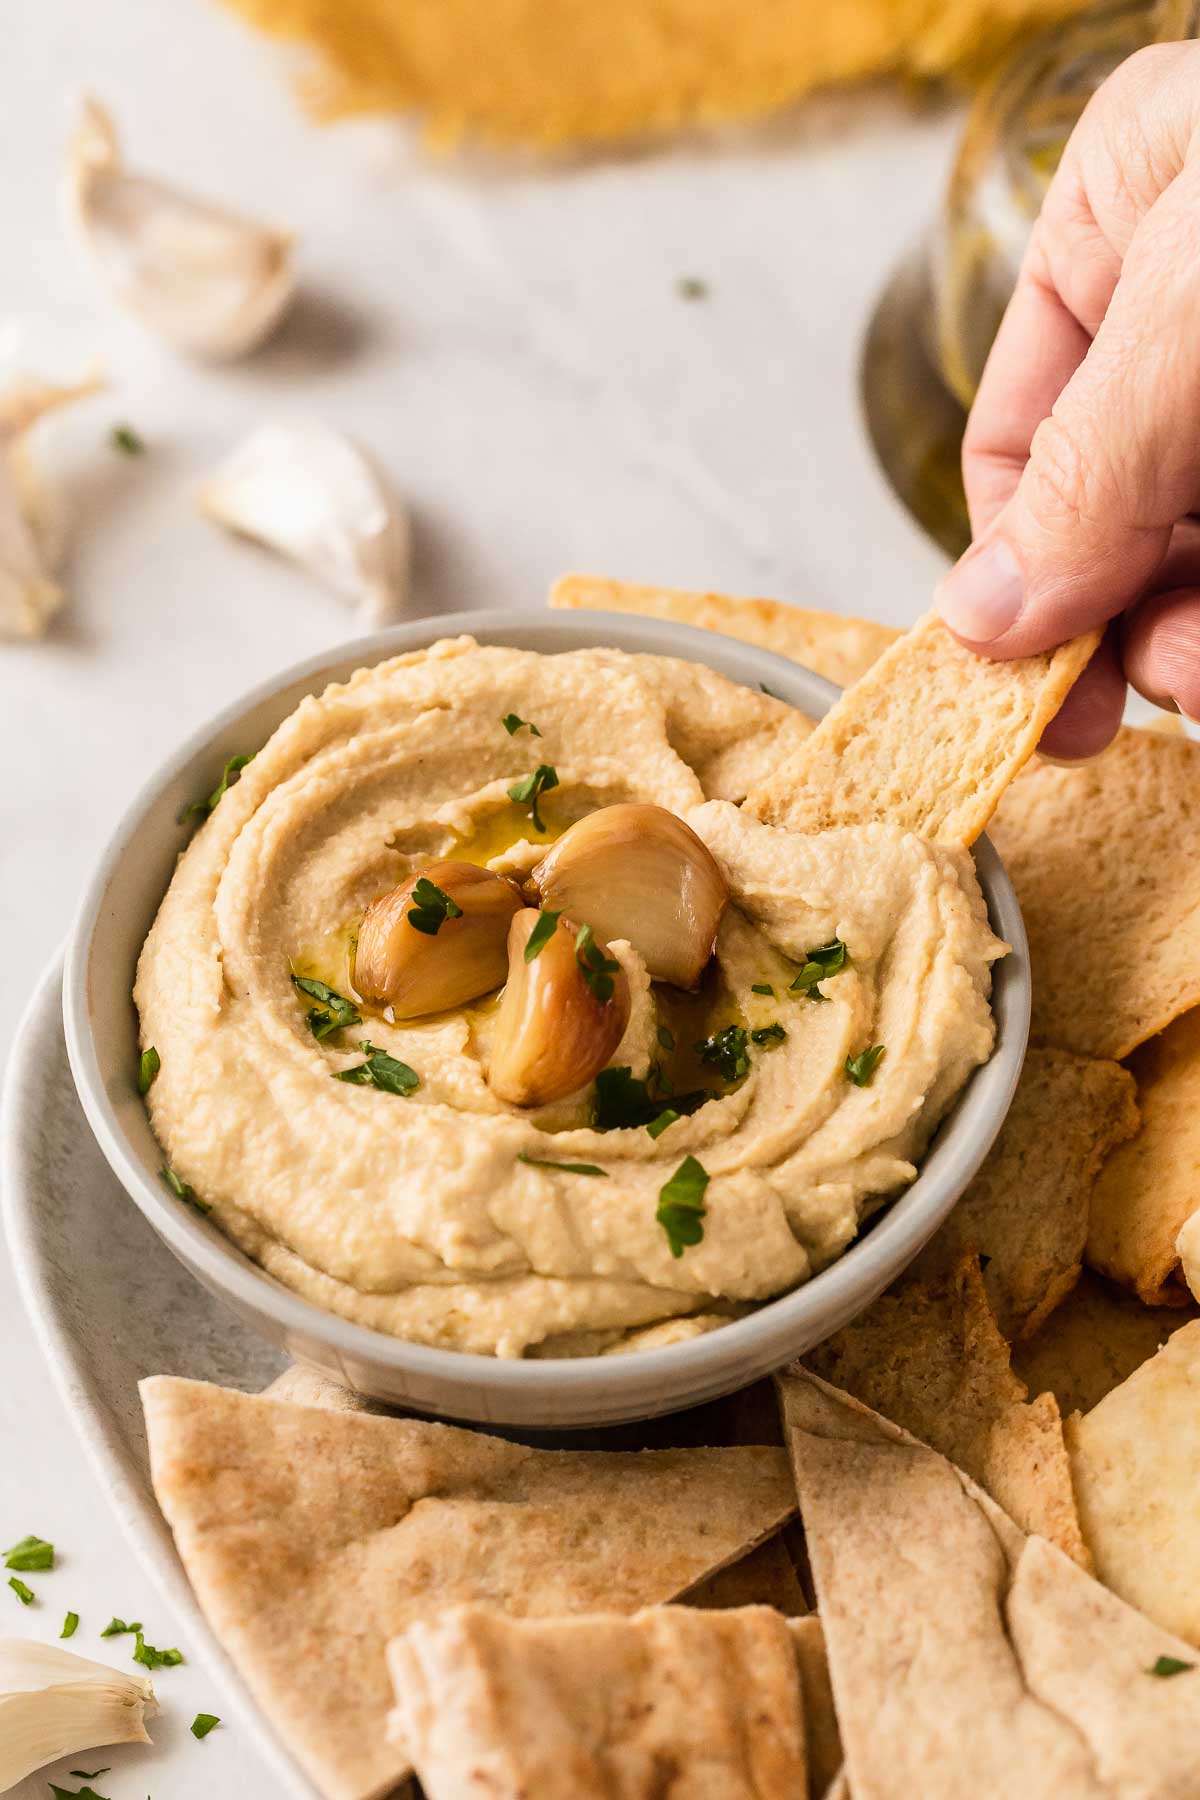 Hand dipping pita chip into hummus with garlic cloves on top.